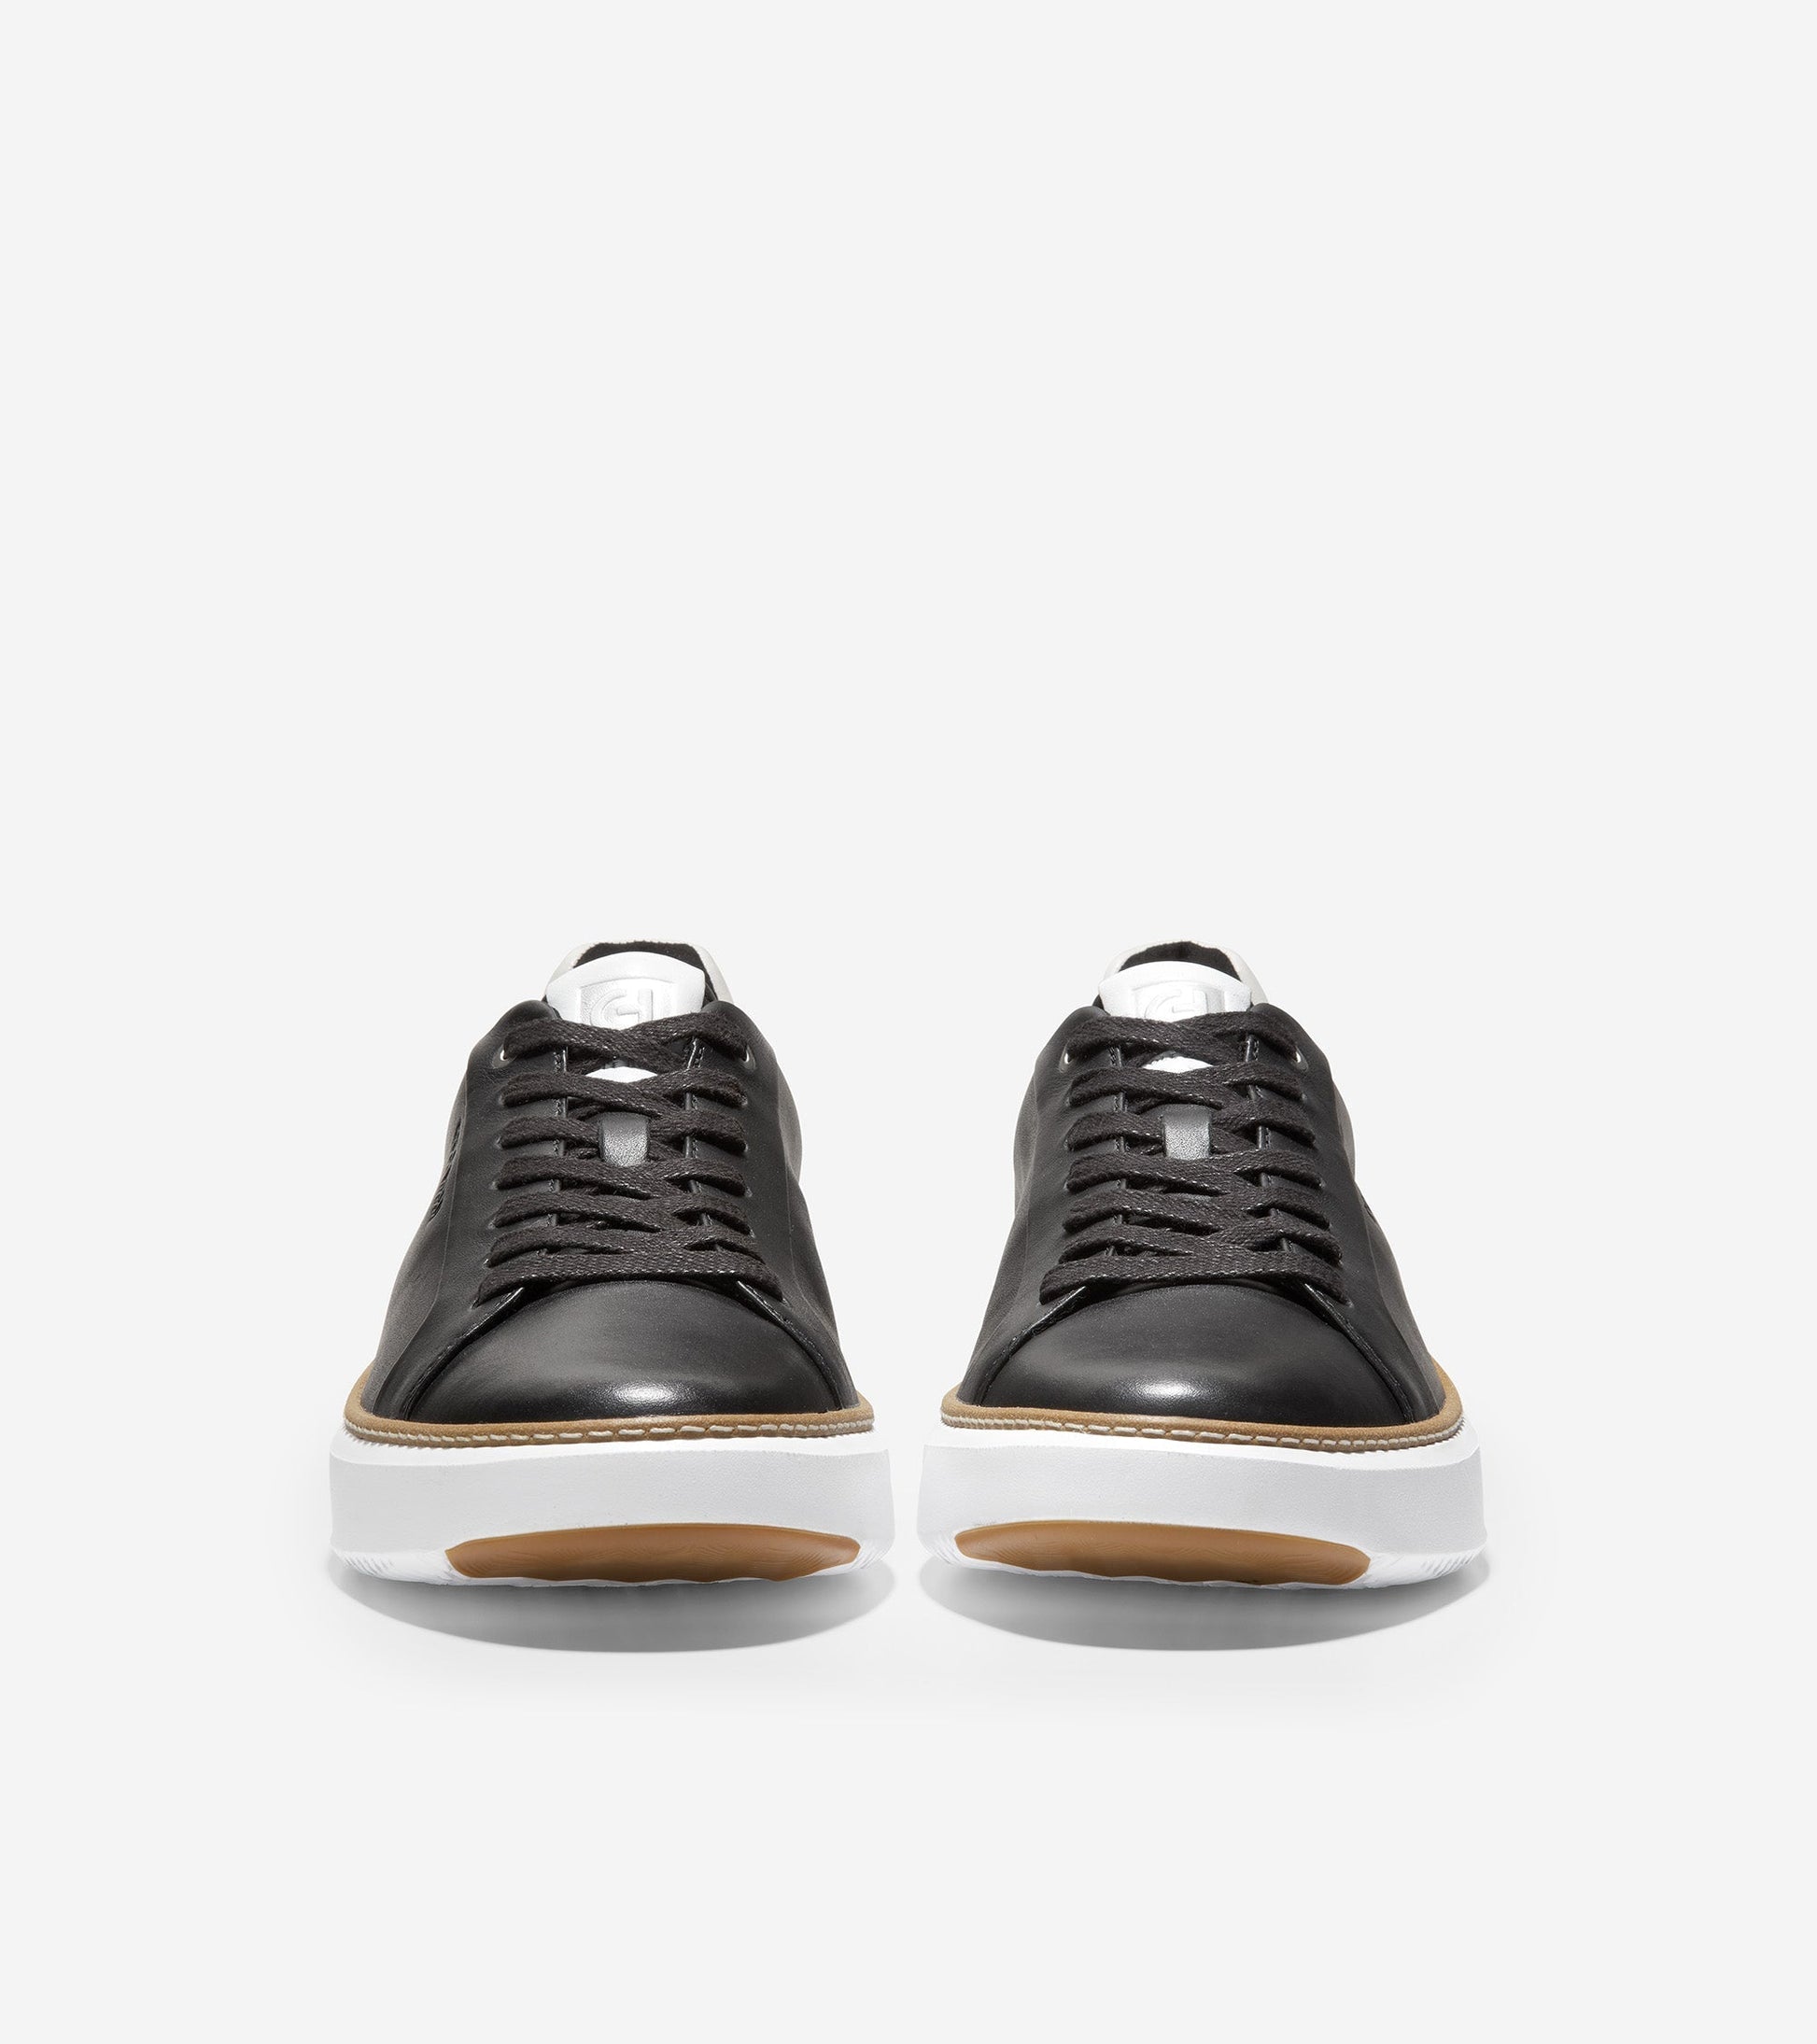 GrandPrø Topspin Sneakers - Cole Haan Germany